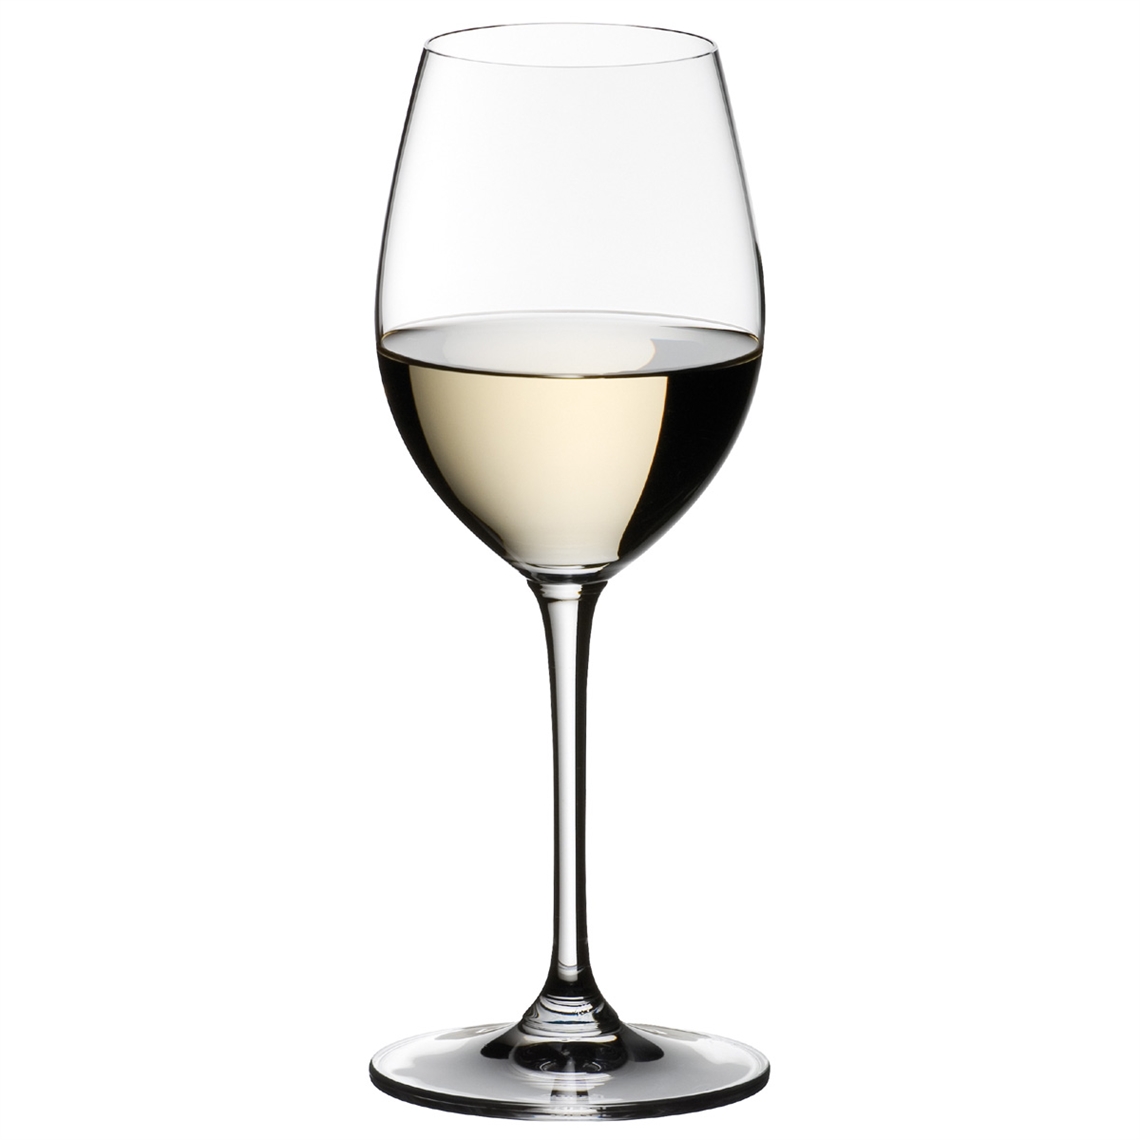 View more mark thomas from our Dessert Wine Glasses range